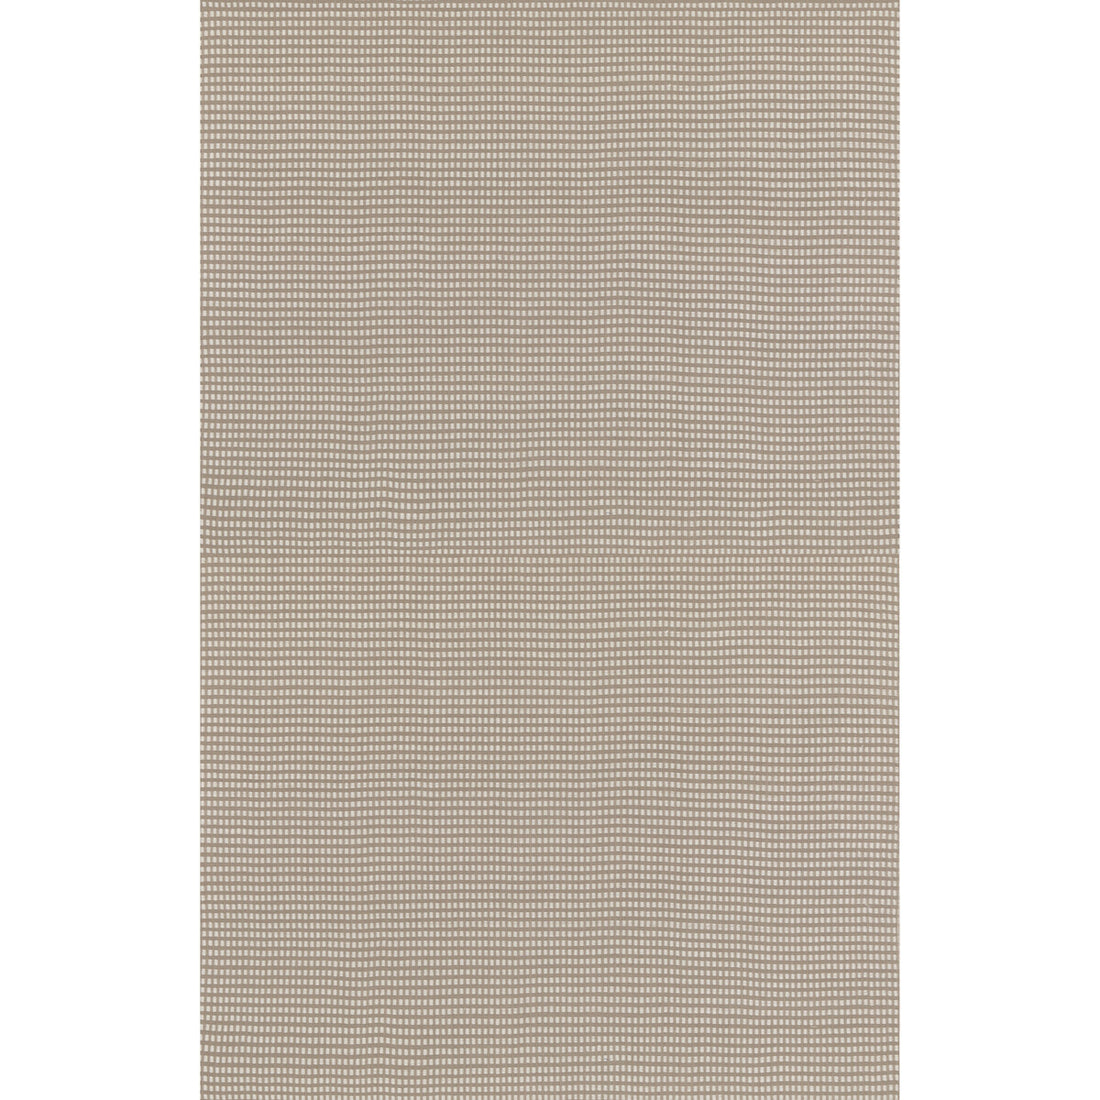 Balandra fabric in linen color - pattern ED85339.110.0 - by Threads in the Faraway collection